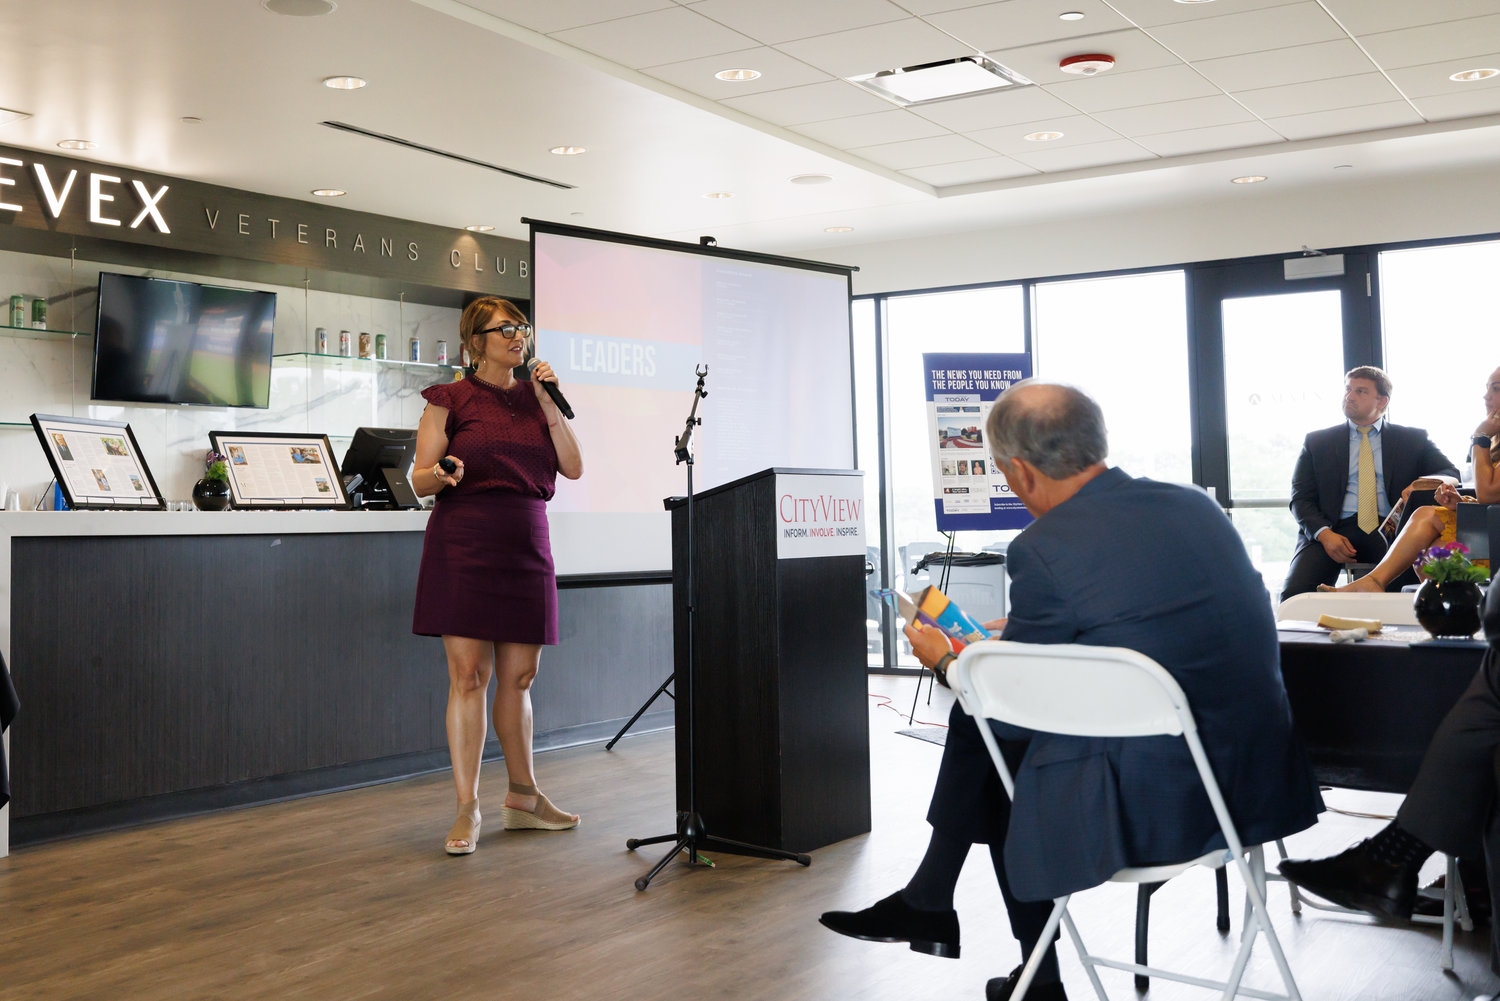 Bianca Shoneman, president and CEO of the Cool Spring Downtown District, provides an update on projects and events in the downtown area during the 2022 CityView Downtown Visionaries Luncheon Wednesday at Segra Stadium.